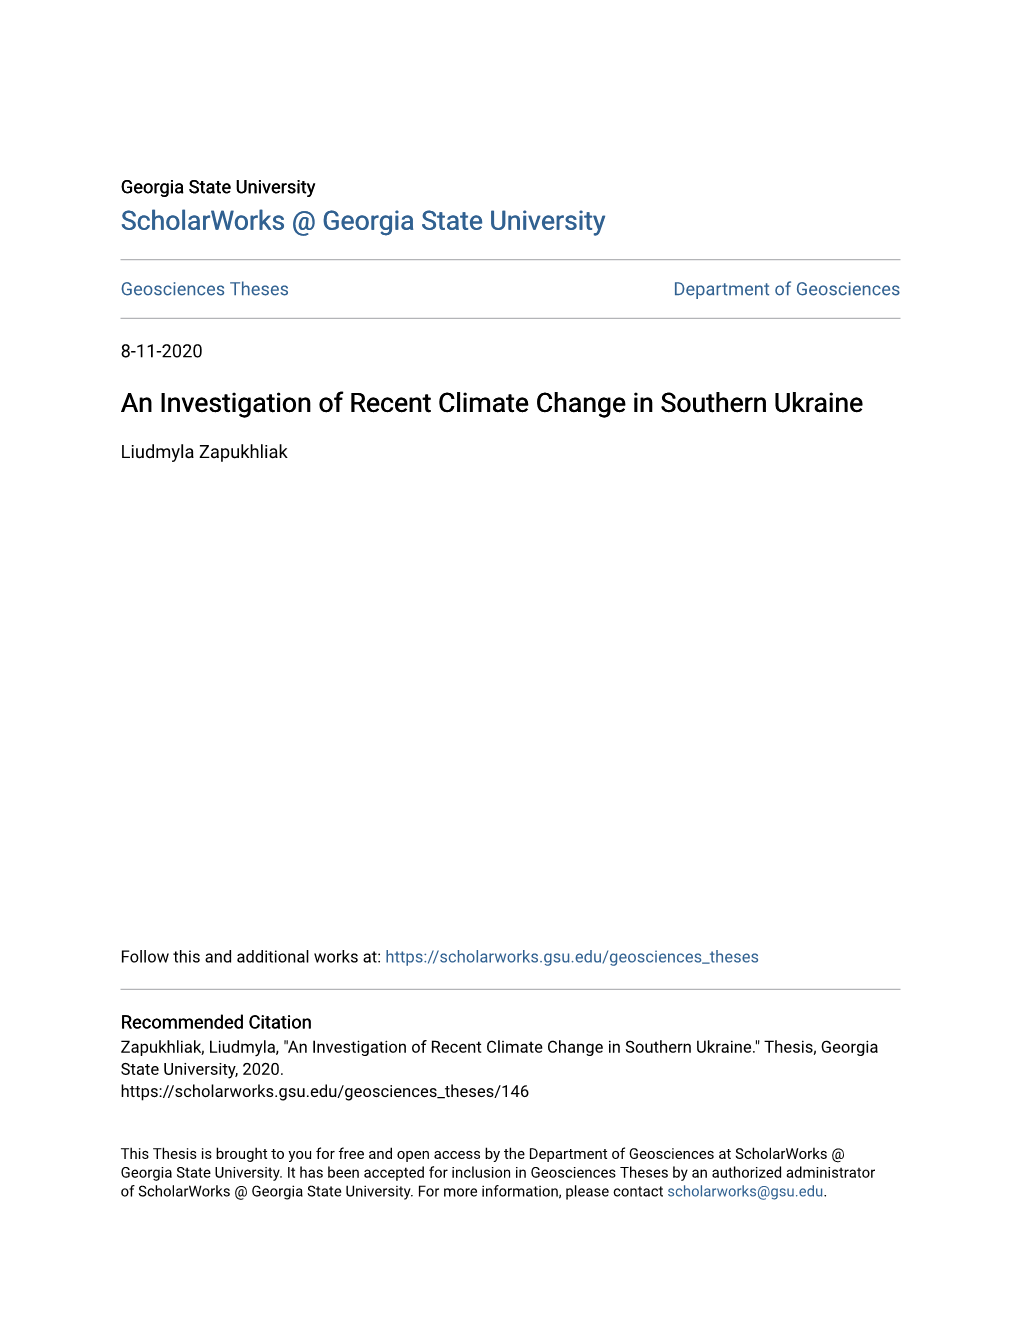 An Investigation of Recent Climate Change in Southern Ukraine